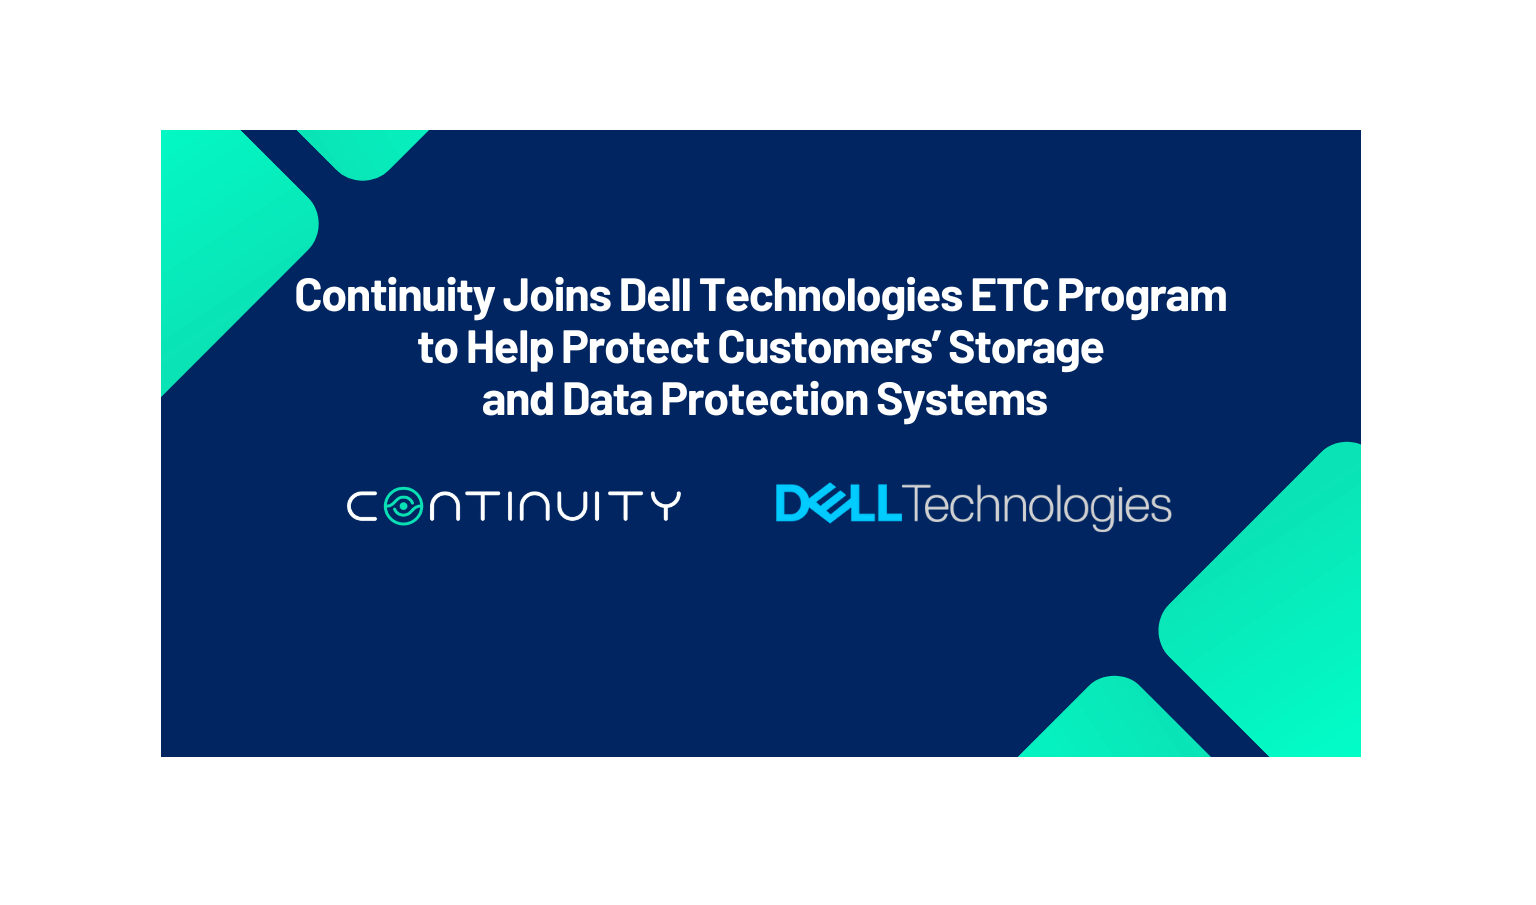 Continuity Joins Dell Technologies ETC Program to Help Protect Customers’ Storage and Data Protection Systems